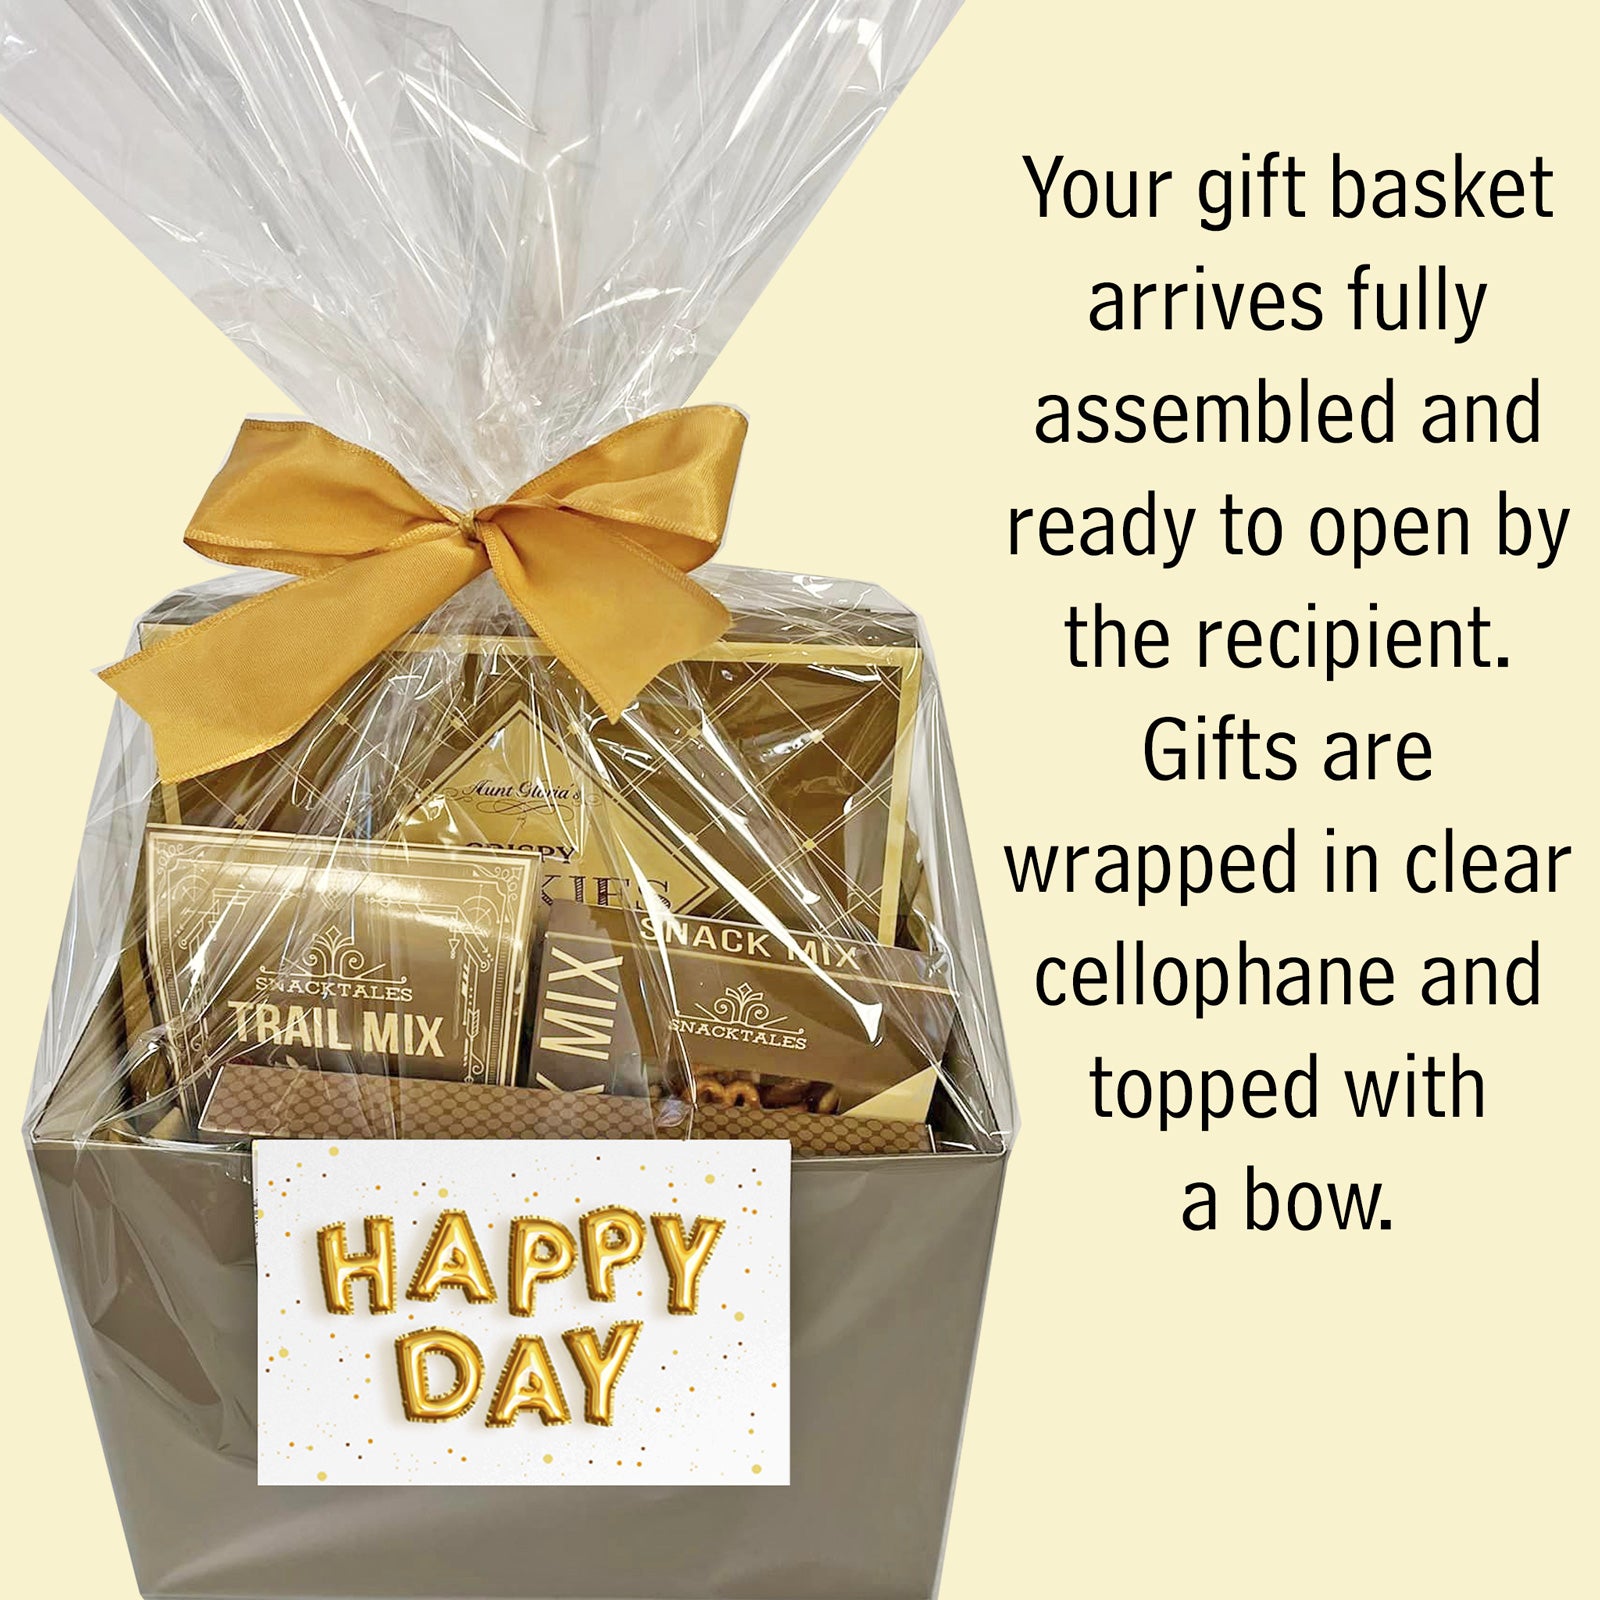 Gift basket for the elderly (and why kids should be around the